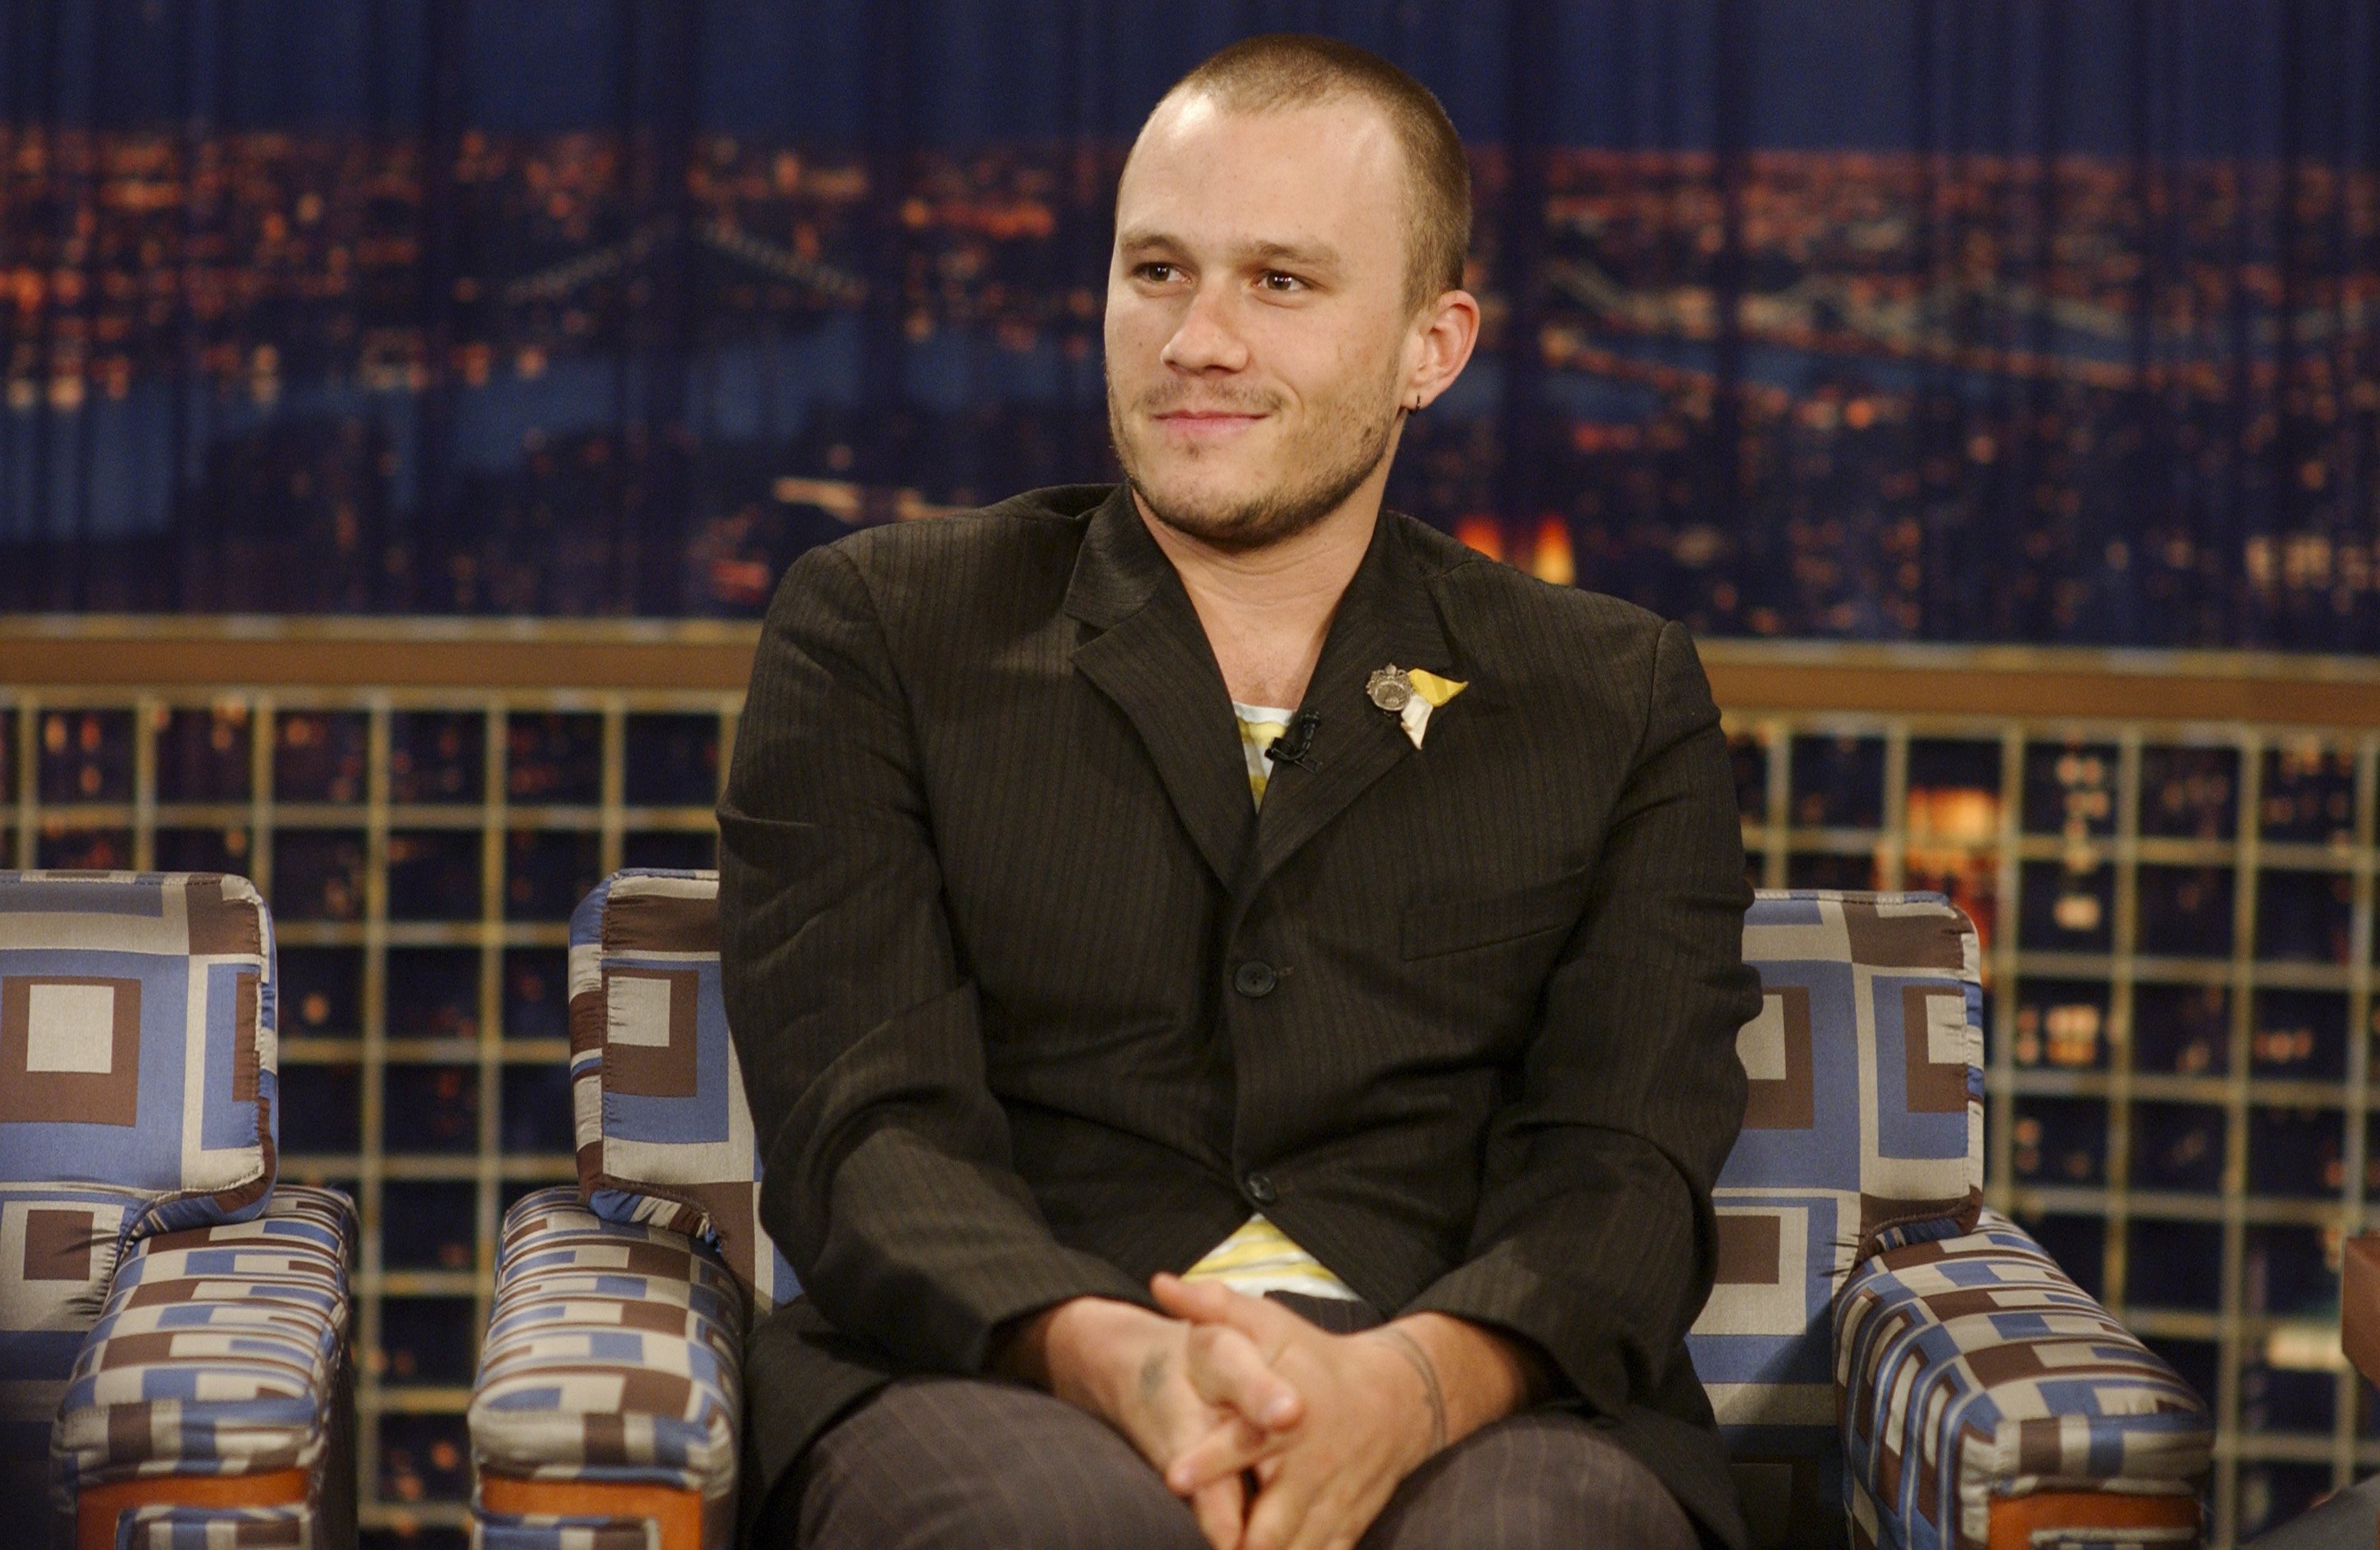 Heath Ledger on season 12 of "Late Night with Conan O'Brien." | Photo: Getty Images